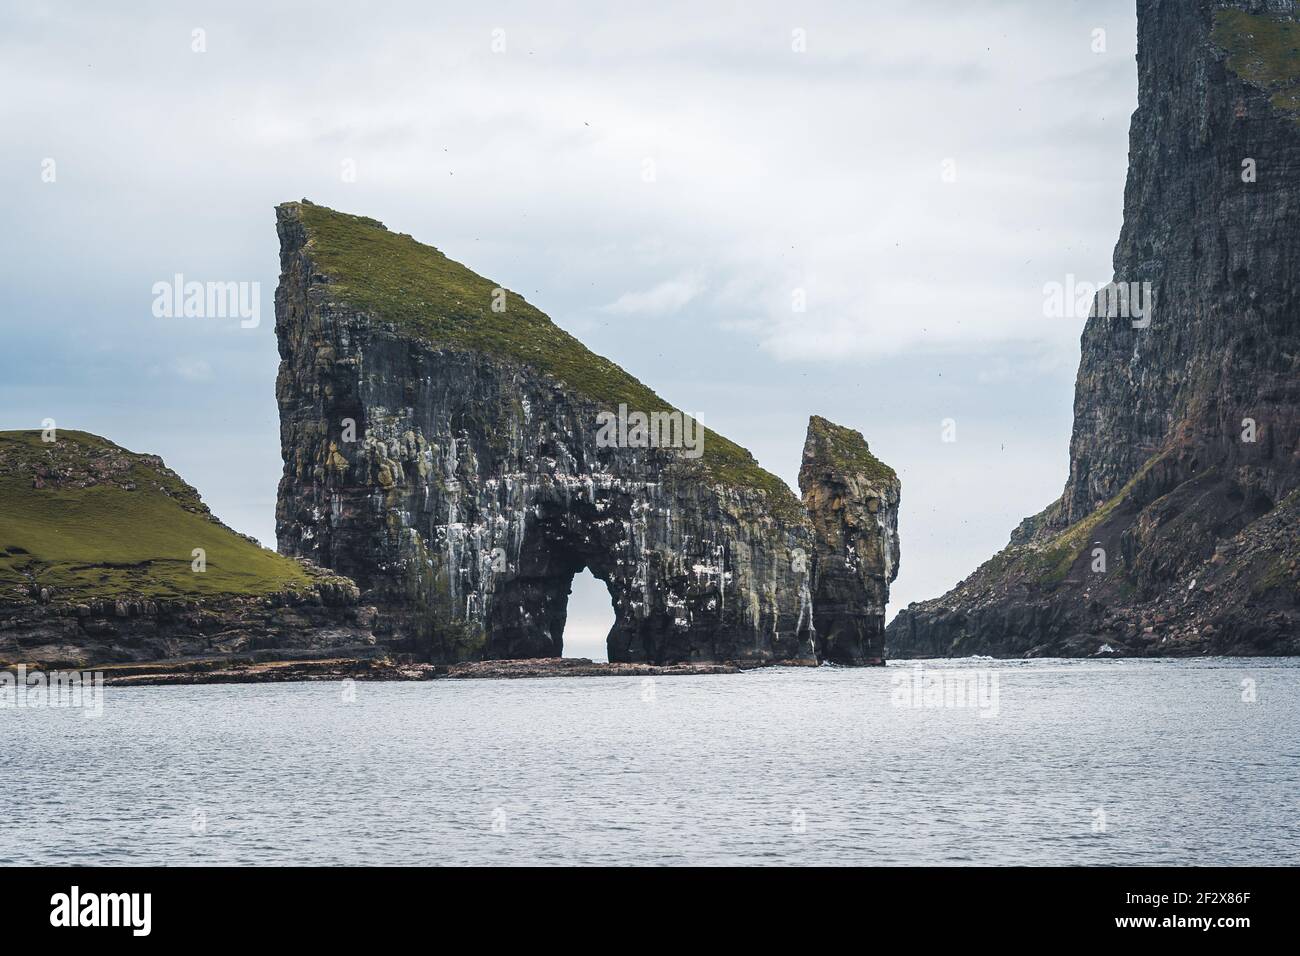 Close-up shot of famous Drangarnir cliff with Tindholmur islands in the background taken during early morning hike in spring at Faroese coastline Stock Photo